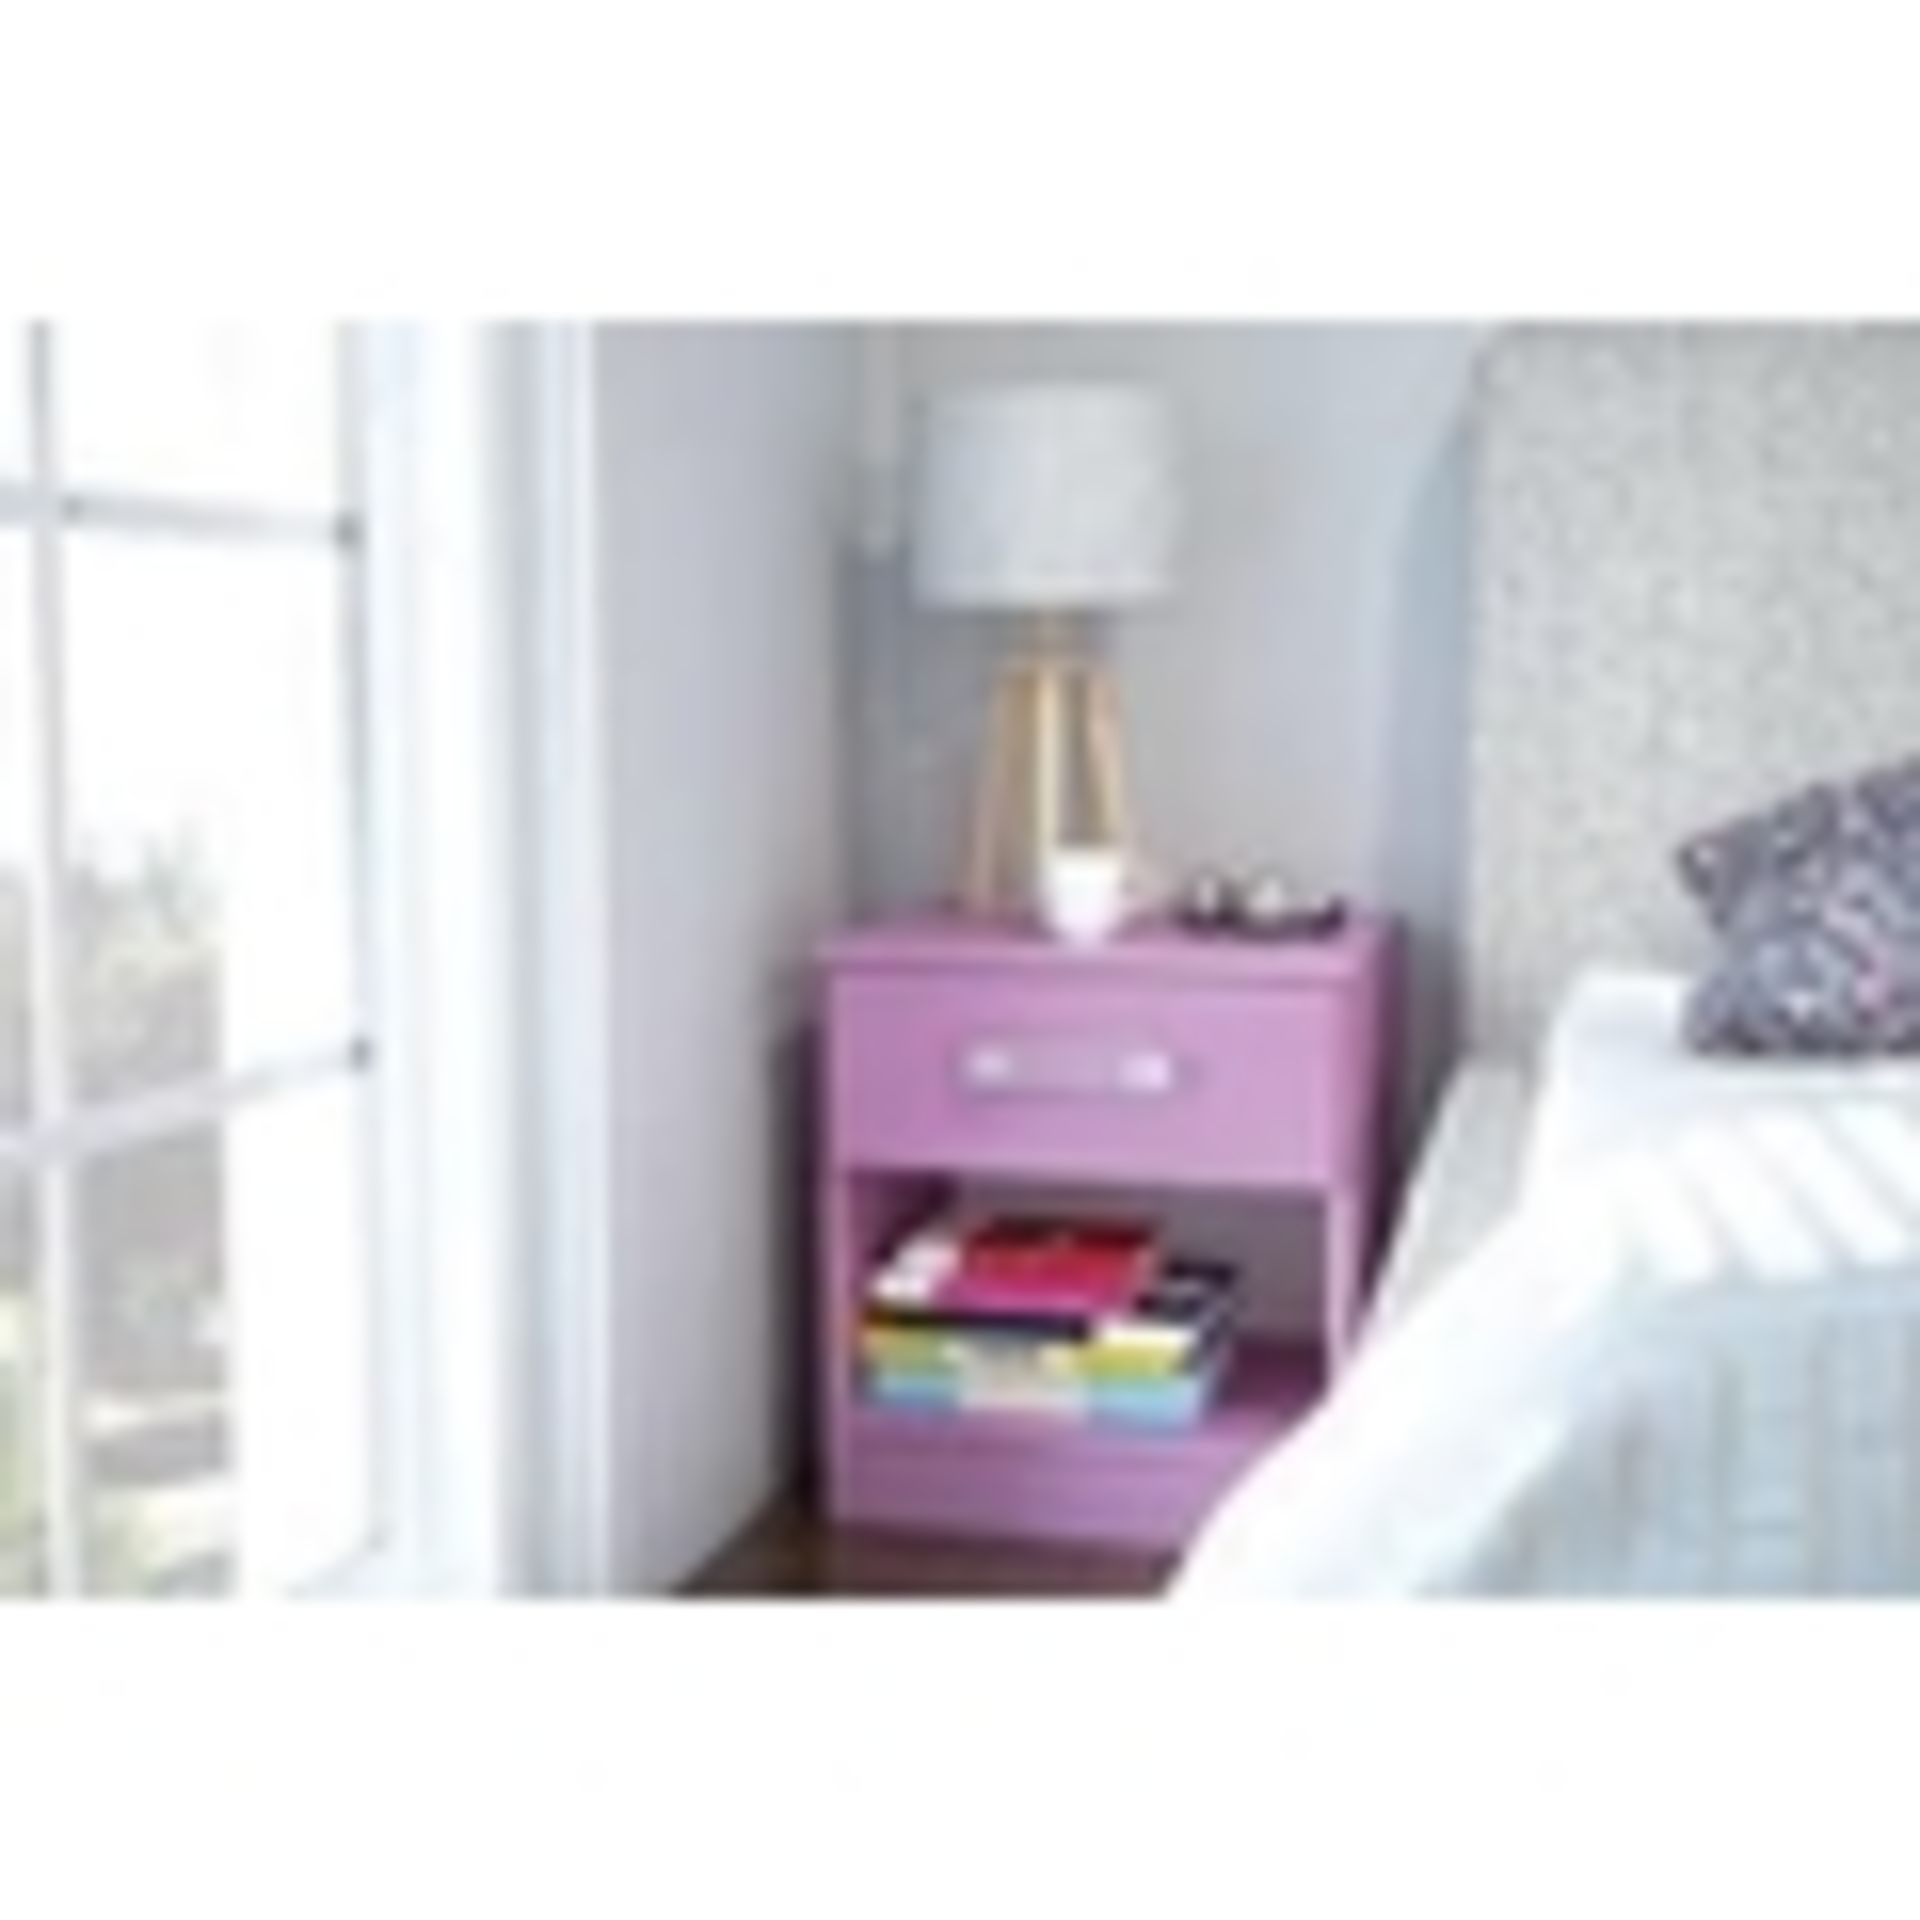 1 BRAND NEW BOXED REFLECT PINK 1 DRAWER BEDSIDE CABINET